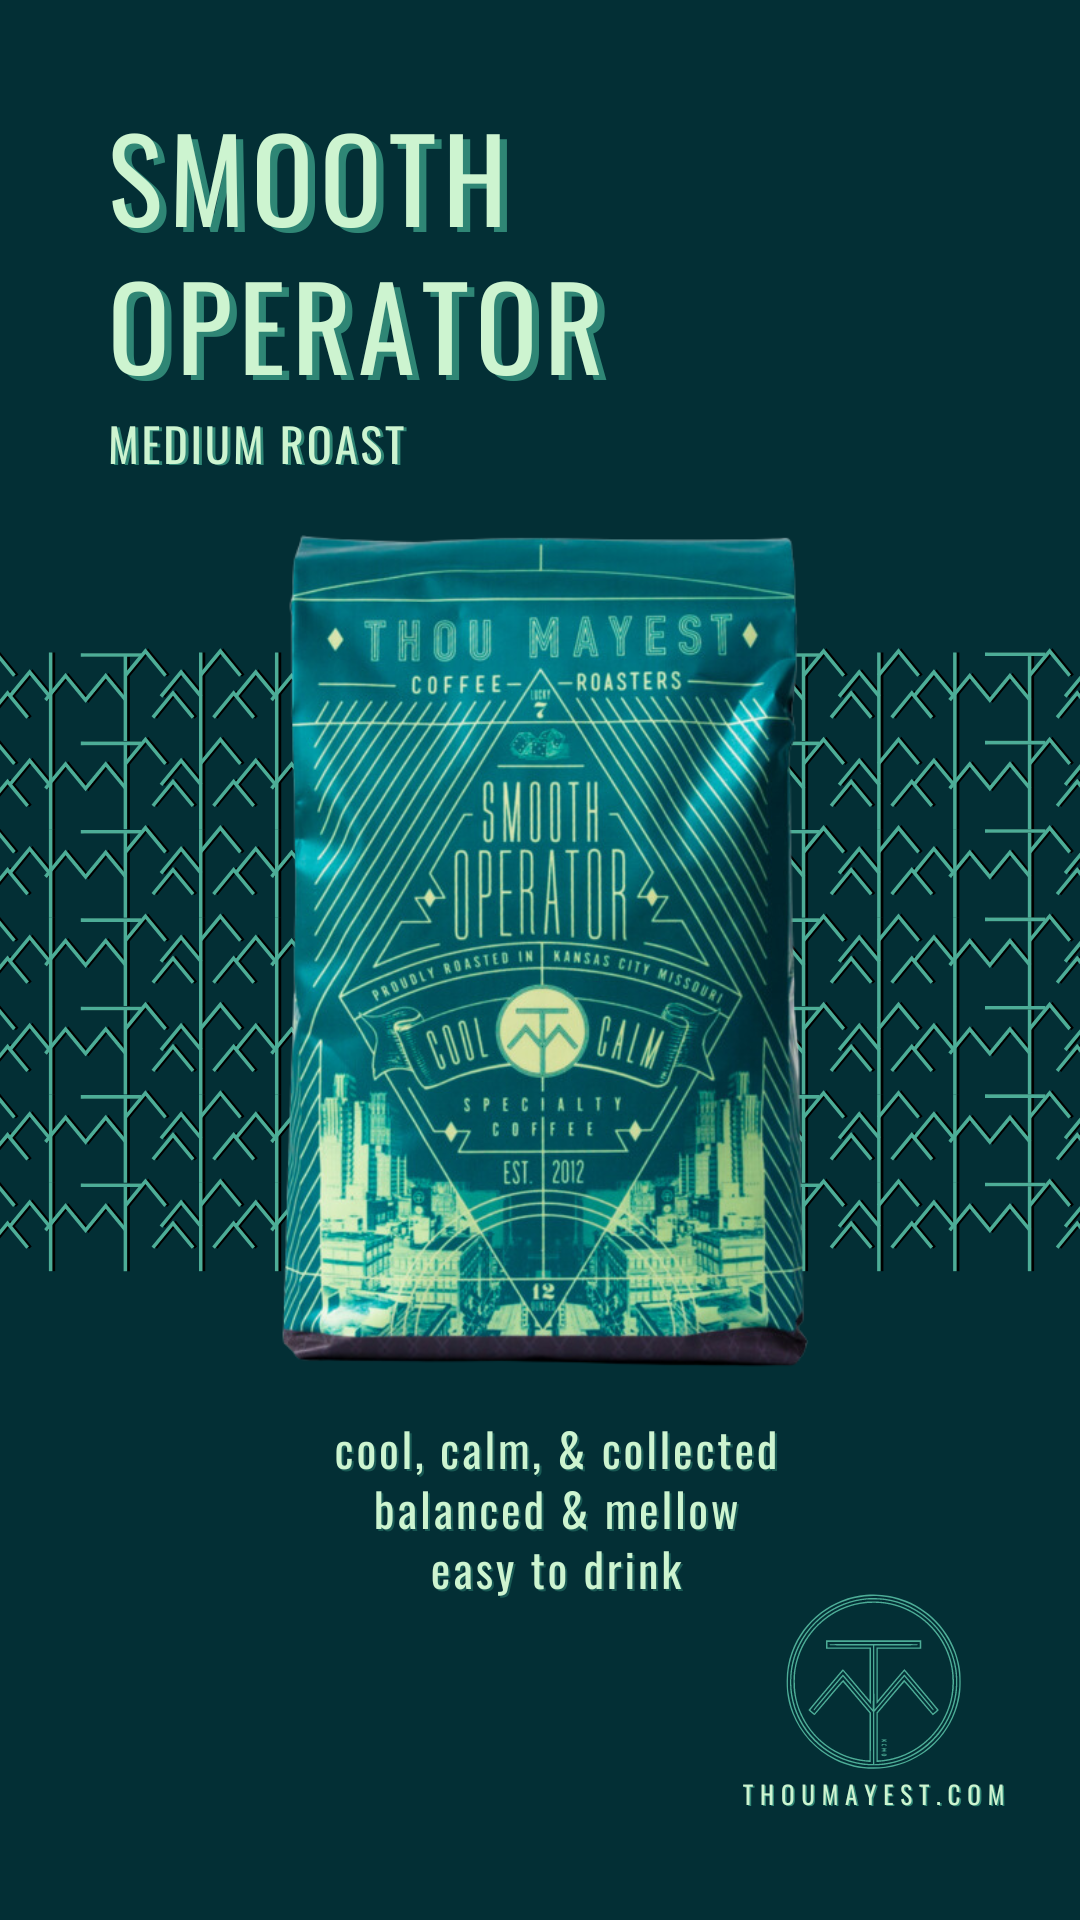 Image of Smooth Operator 12oz bag of coffee with description: Medium roast. Cool, calm, &amp; collected. Balanced &amp; mellow. Easy to drink.